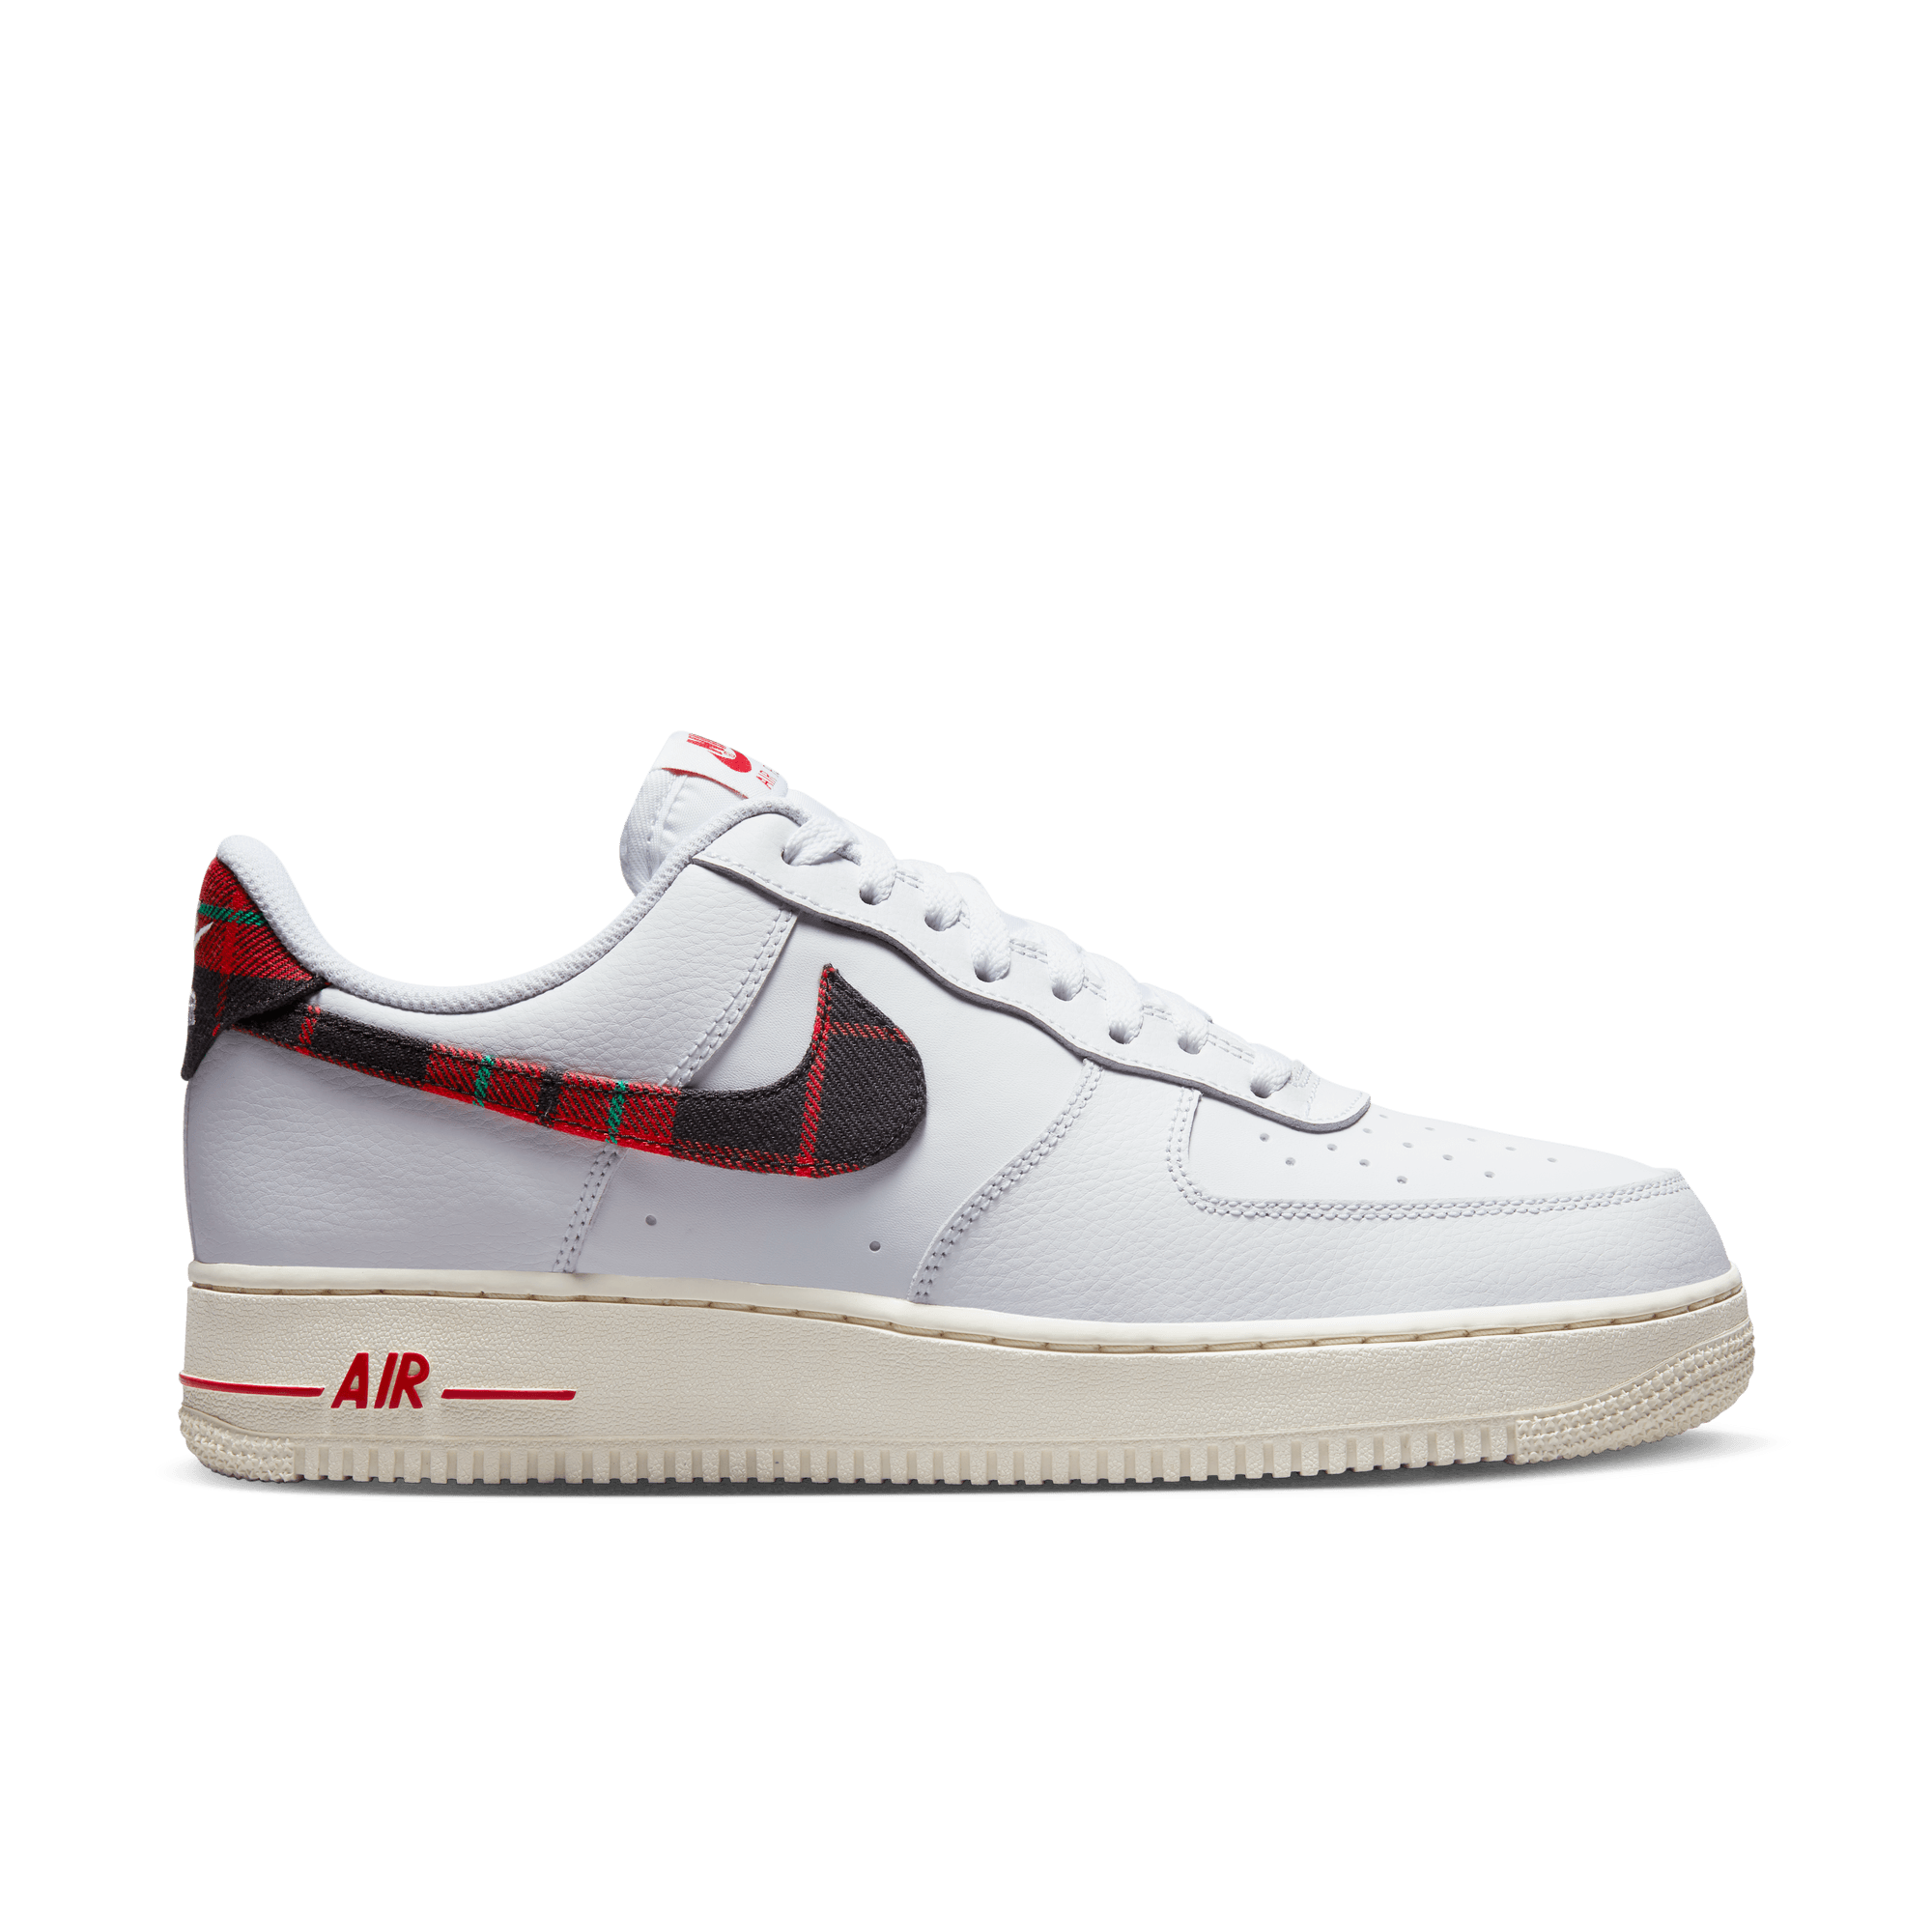 Nike Air Force 1 '07 LV8 Shoes.